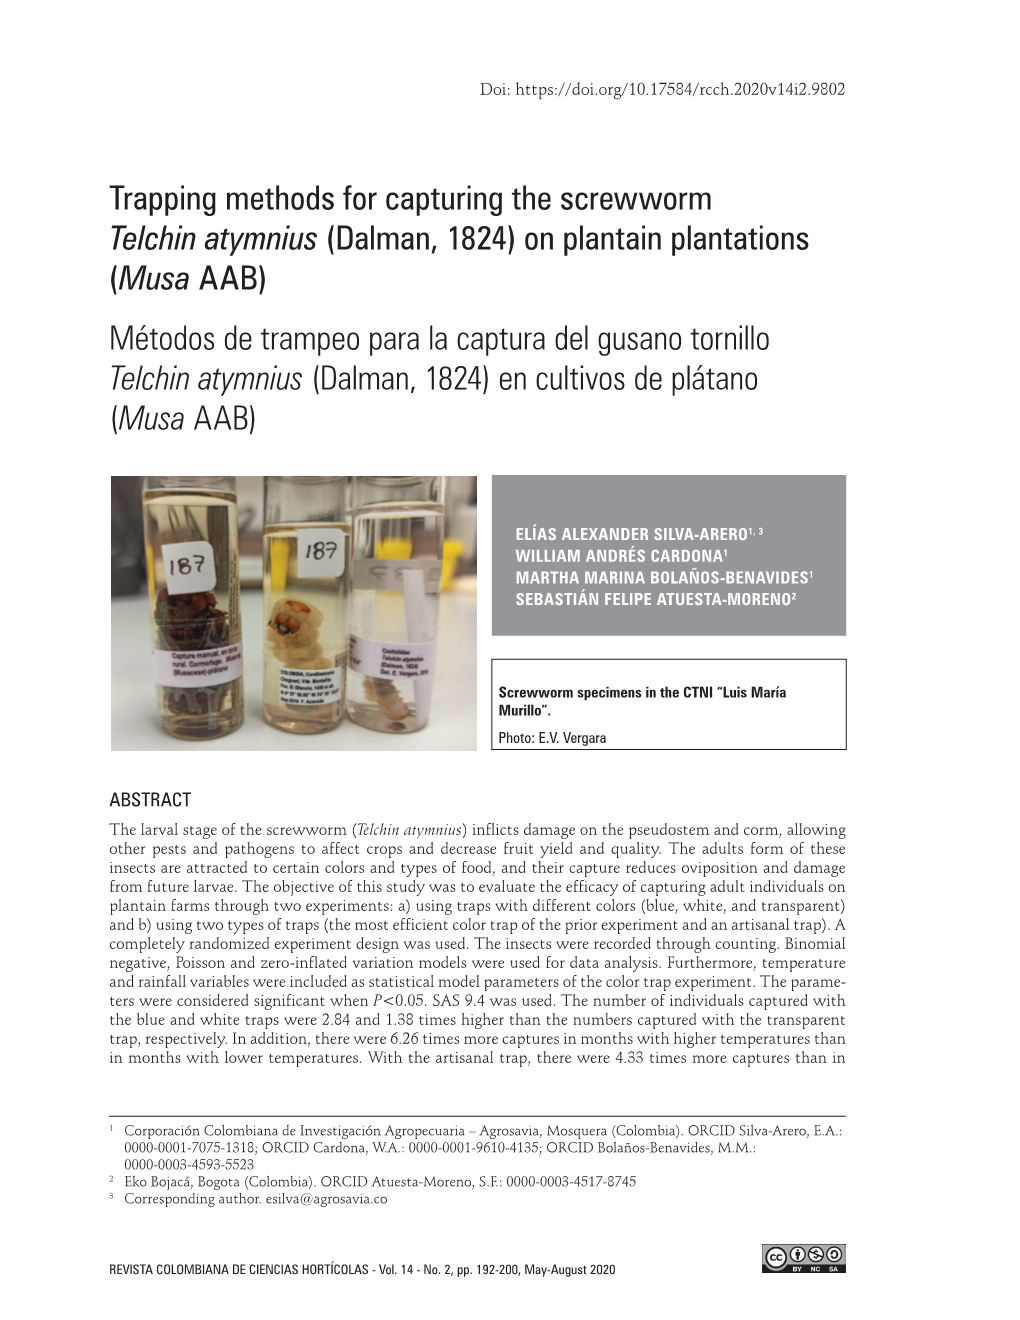 Trapping Methods for Capturing the Screwworm Telchin Atymnius